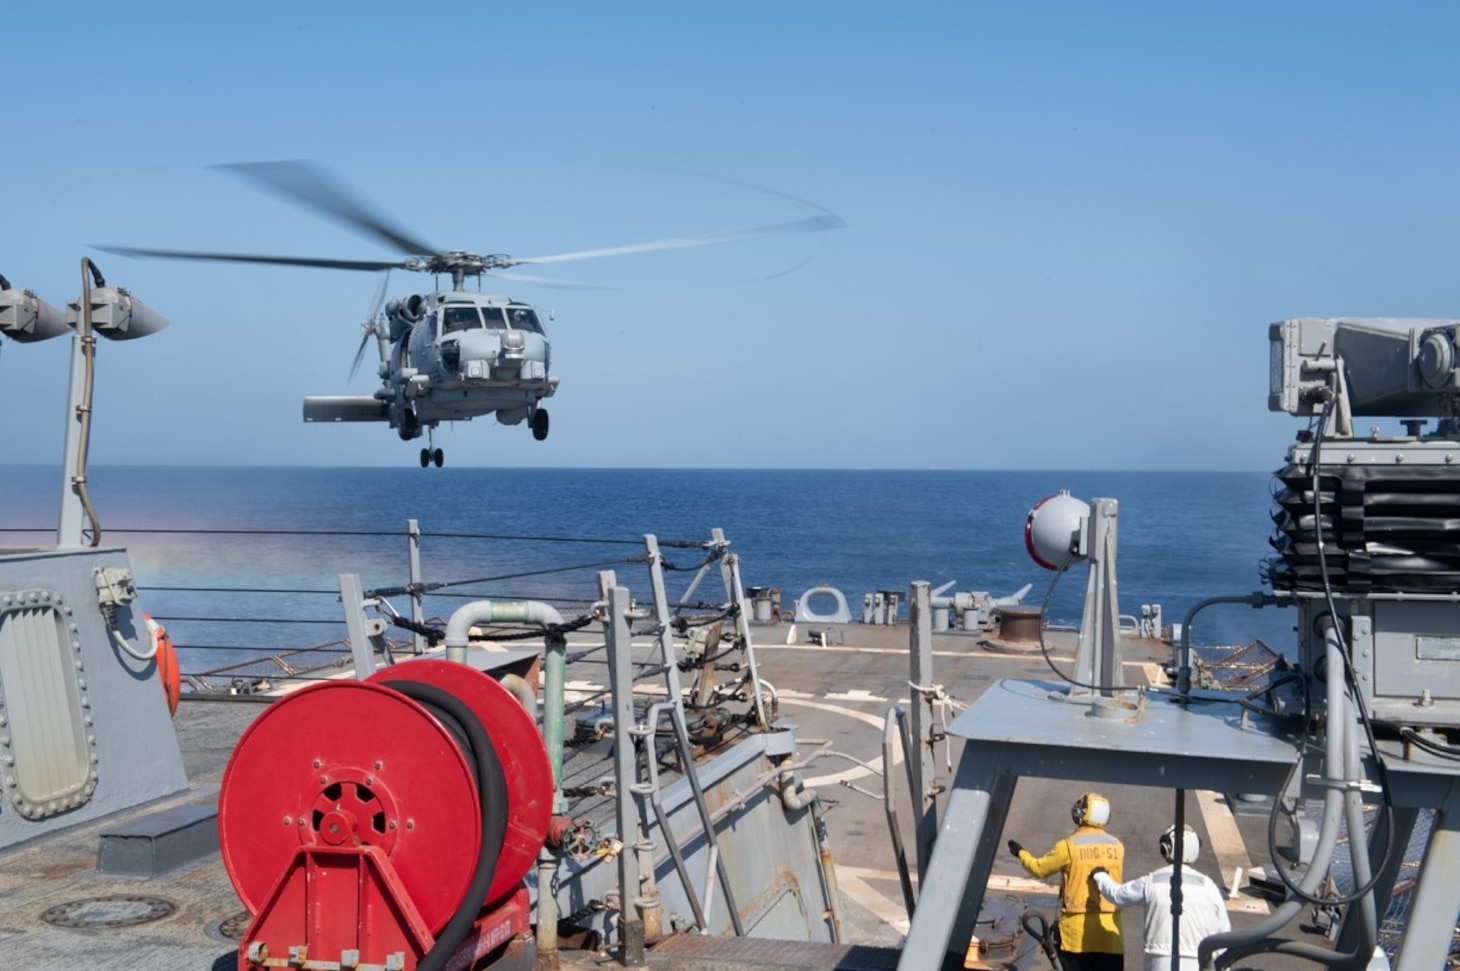 (Aug. 3, 2021) An SH-60 helicopter lands on the flight deck of the Arleigh Burke-class guided-missile destroyer USS Arleigh Burke (DDG 51), Aug. 3, 2021. Arleigh Burke, forward- deployed to Rota, Spain, is on its first patrol in the U.S. Sixth Fleet Area of operations in support of U.S. national security interests and regional allies and partners in Europe and Africa.